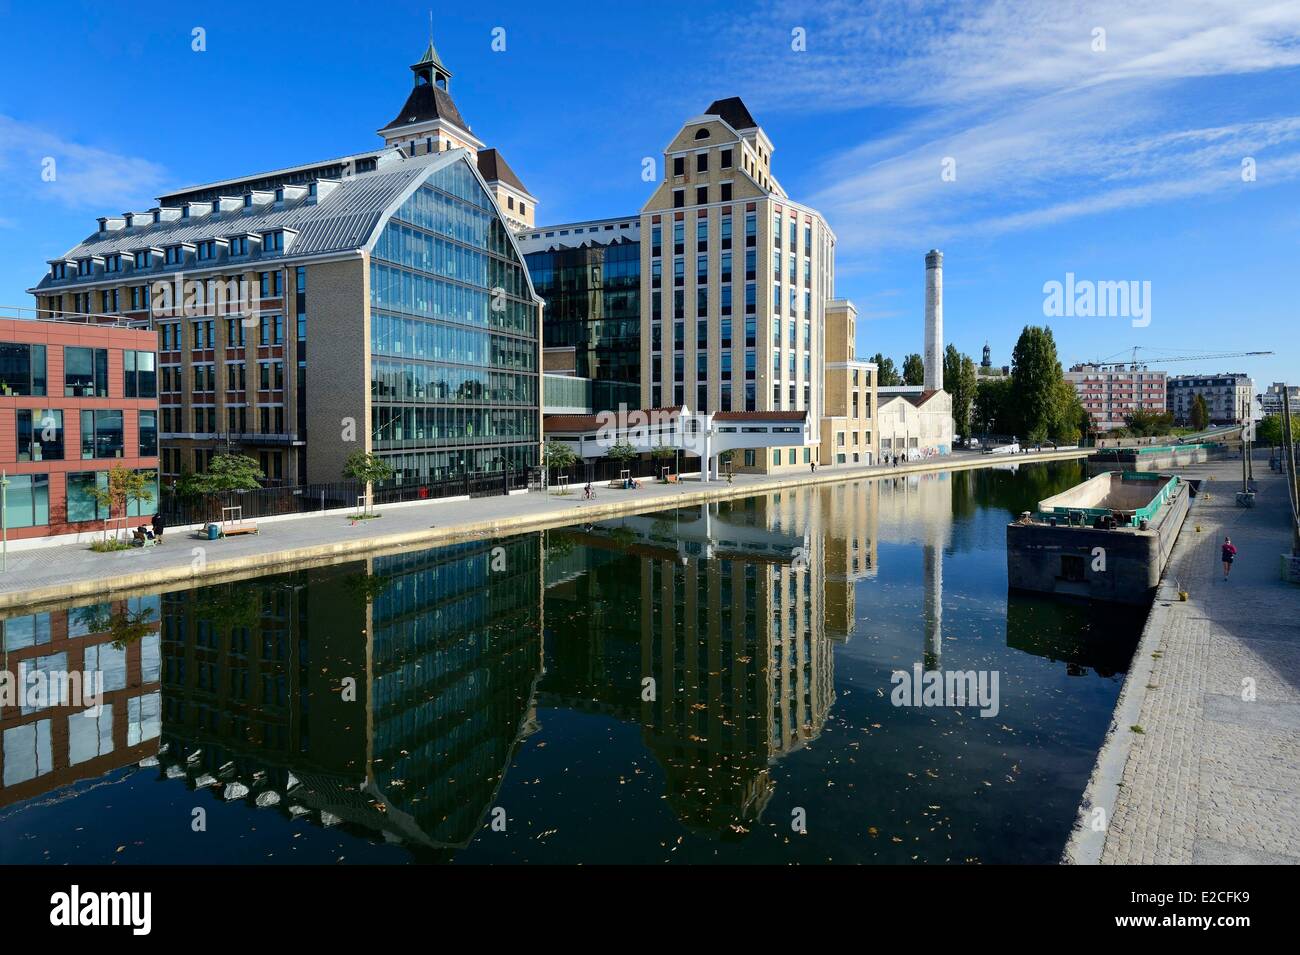 France, Seine Saint Denis, Pantin, Pantin great windmills, former  industrial flour milling created in 1884 and converted into office  buildings by the architects Reichen et Robert for the BNP Paribas  Securities Services,